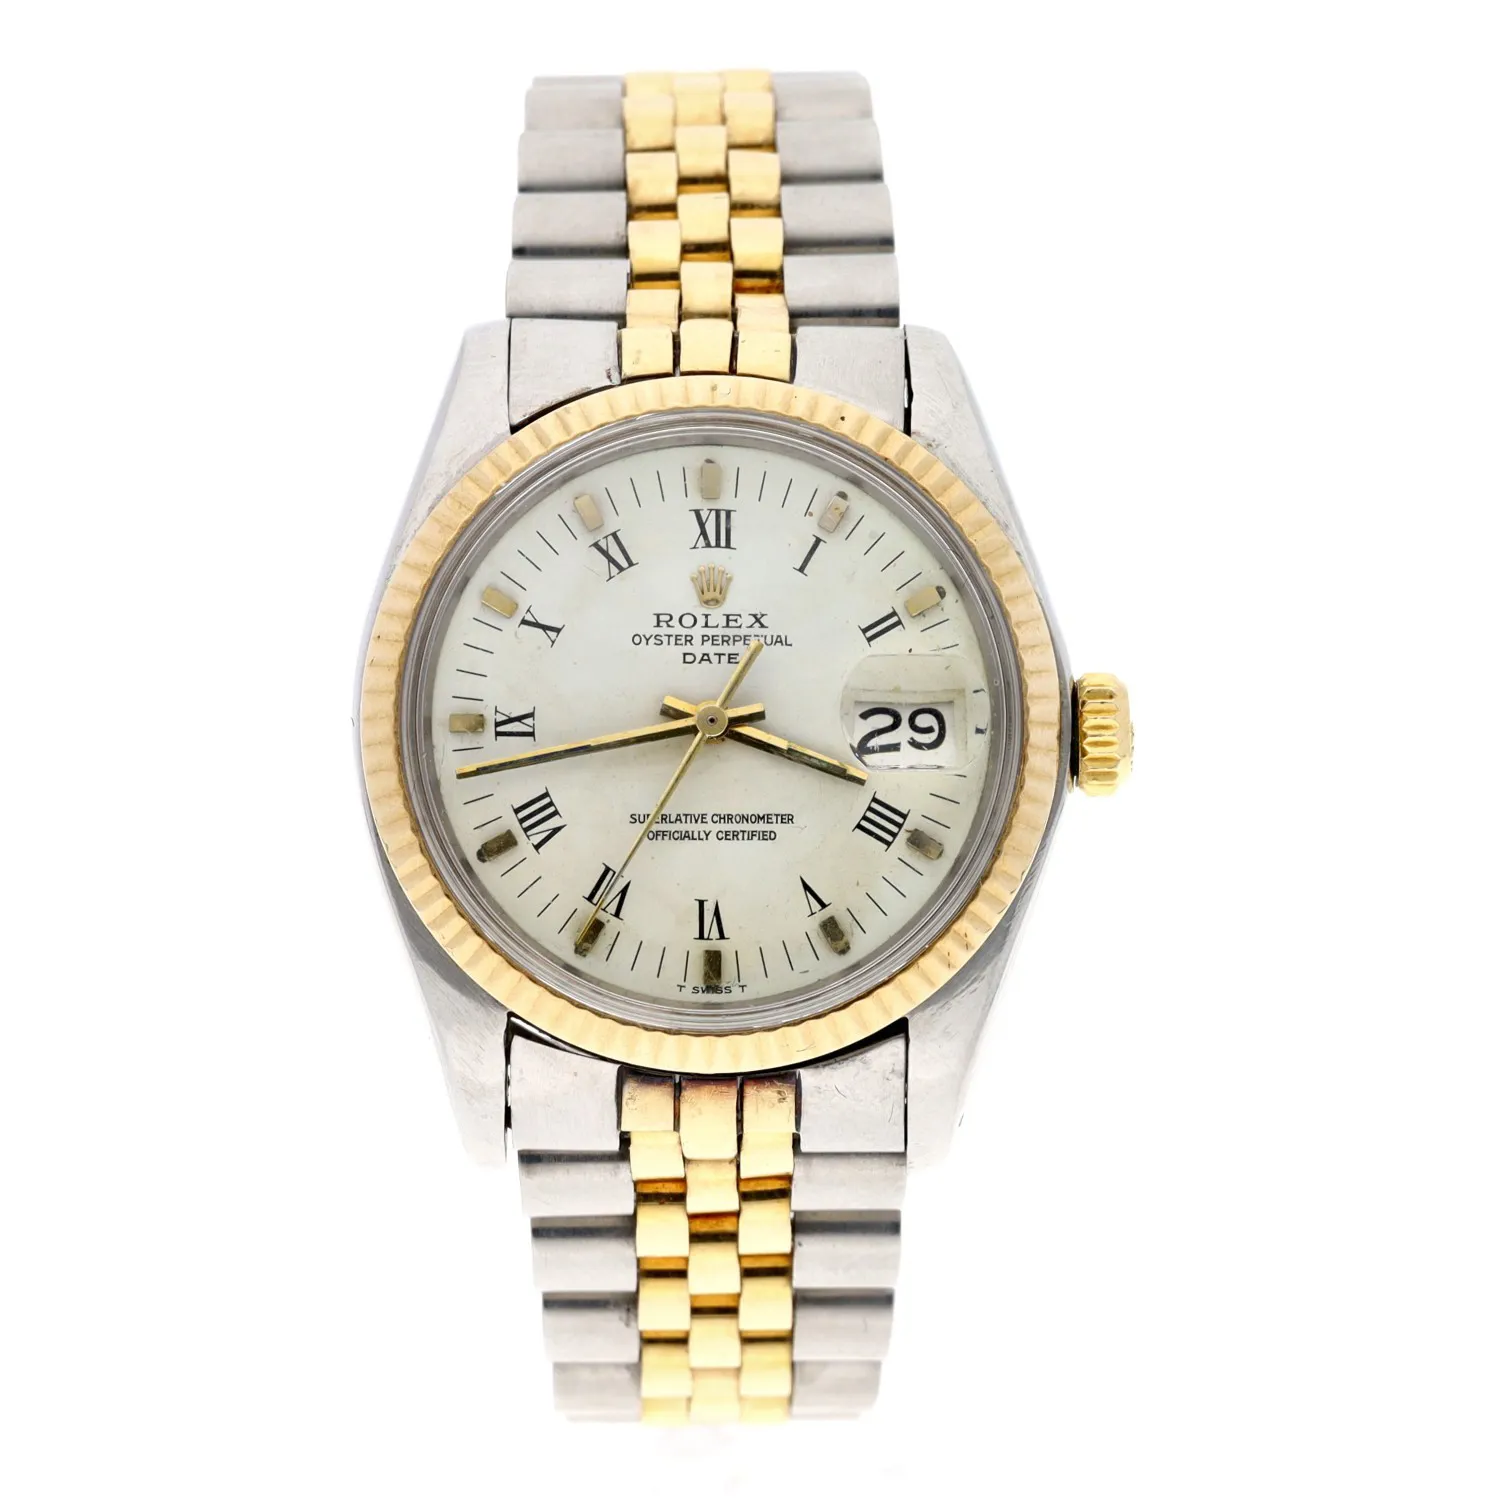 Rolex Oyster Perpetual Date 1500 34mm Stainless steel and yellow gold White